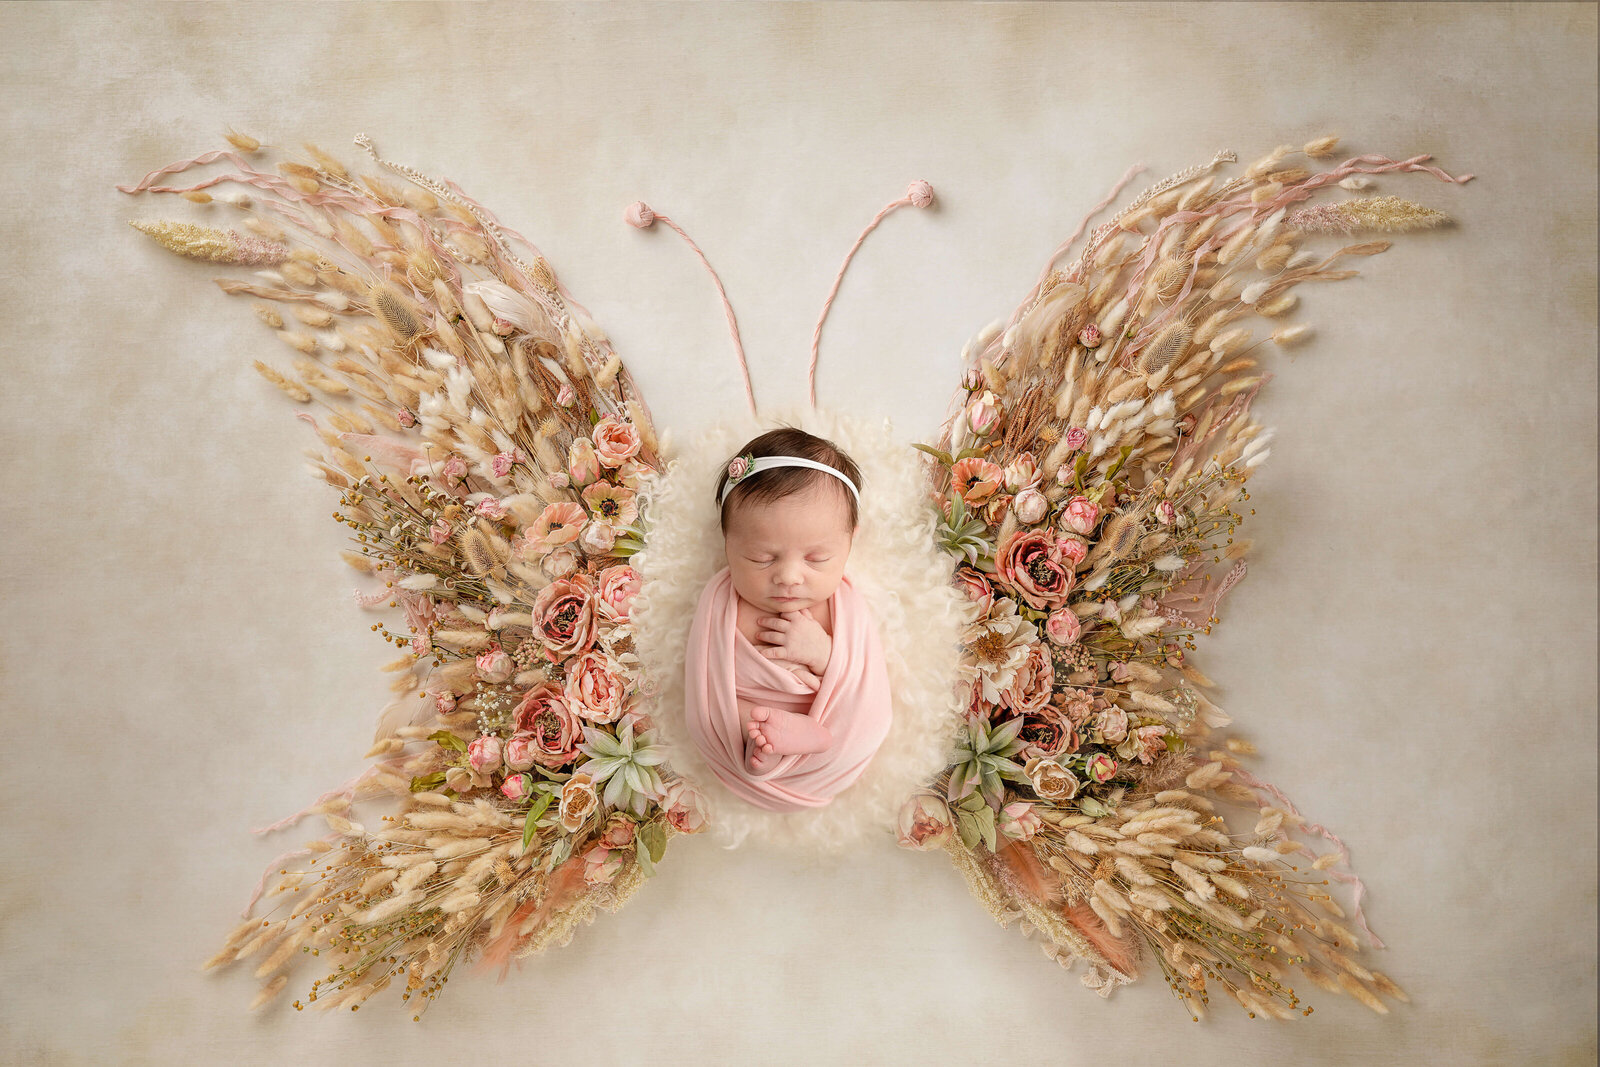 Baby girl sleeping wearing a pink swaddle with a headband of pearls with a butterfly background